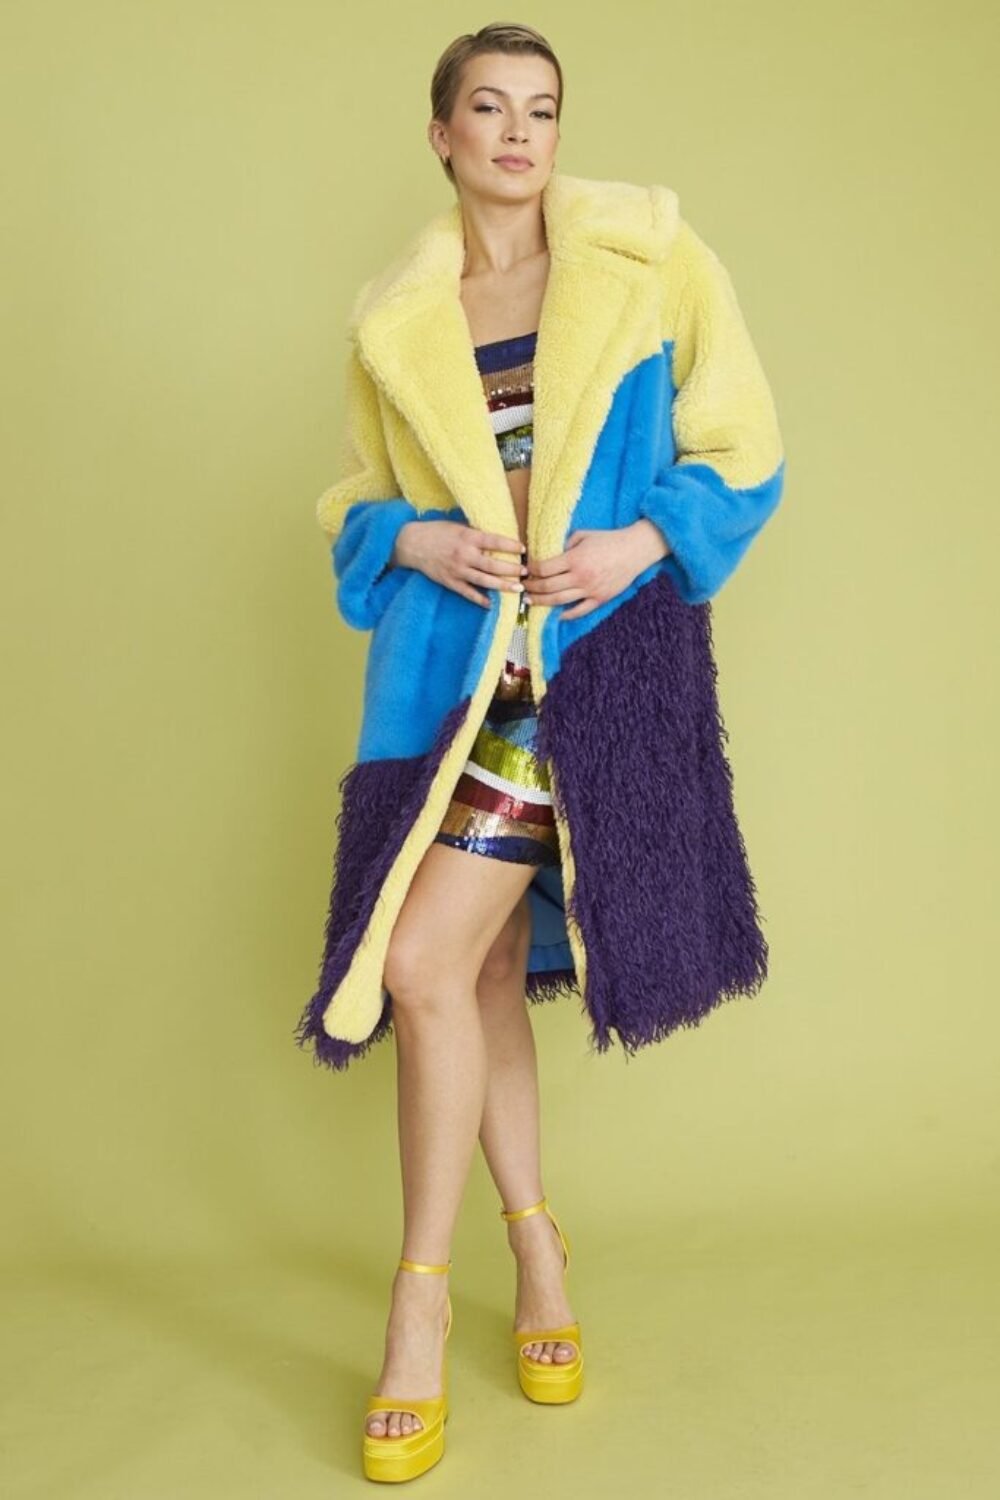 Shop Lux Handmade Bamboo Eco Faux Fur Coat and women's luxury and designer clothes at www.lux-apparel.co.uk